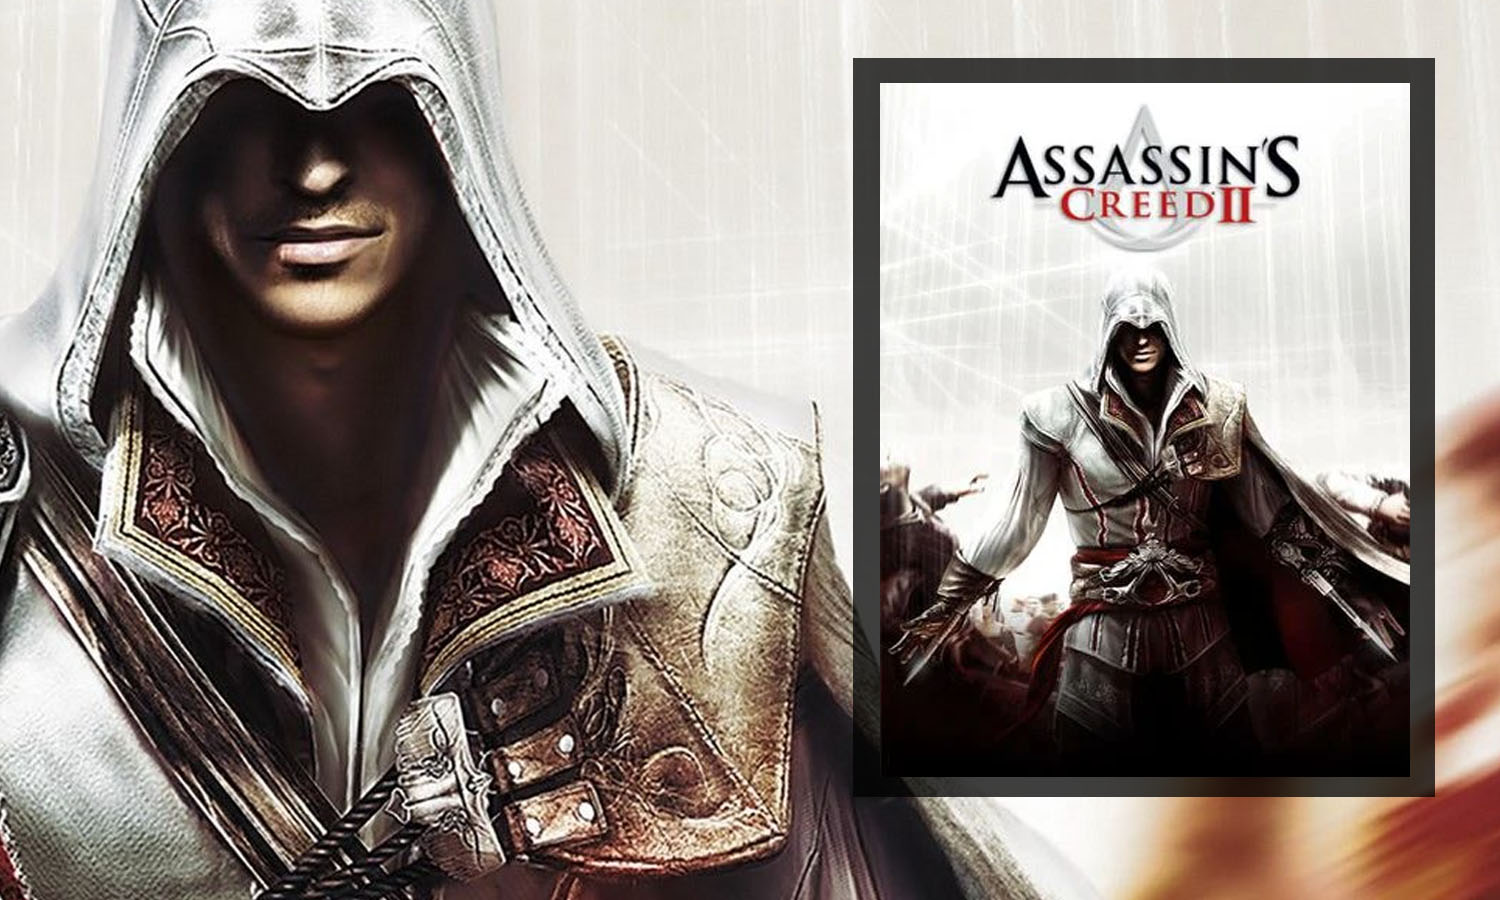 download assassins creed 2 for pc free full version highly compressed